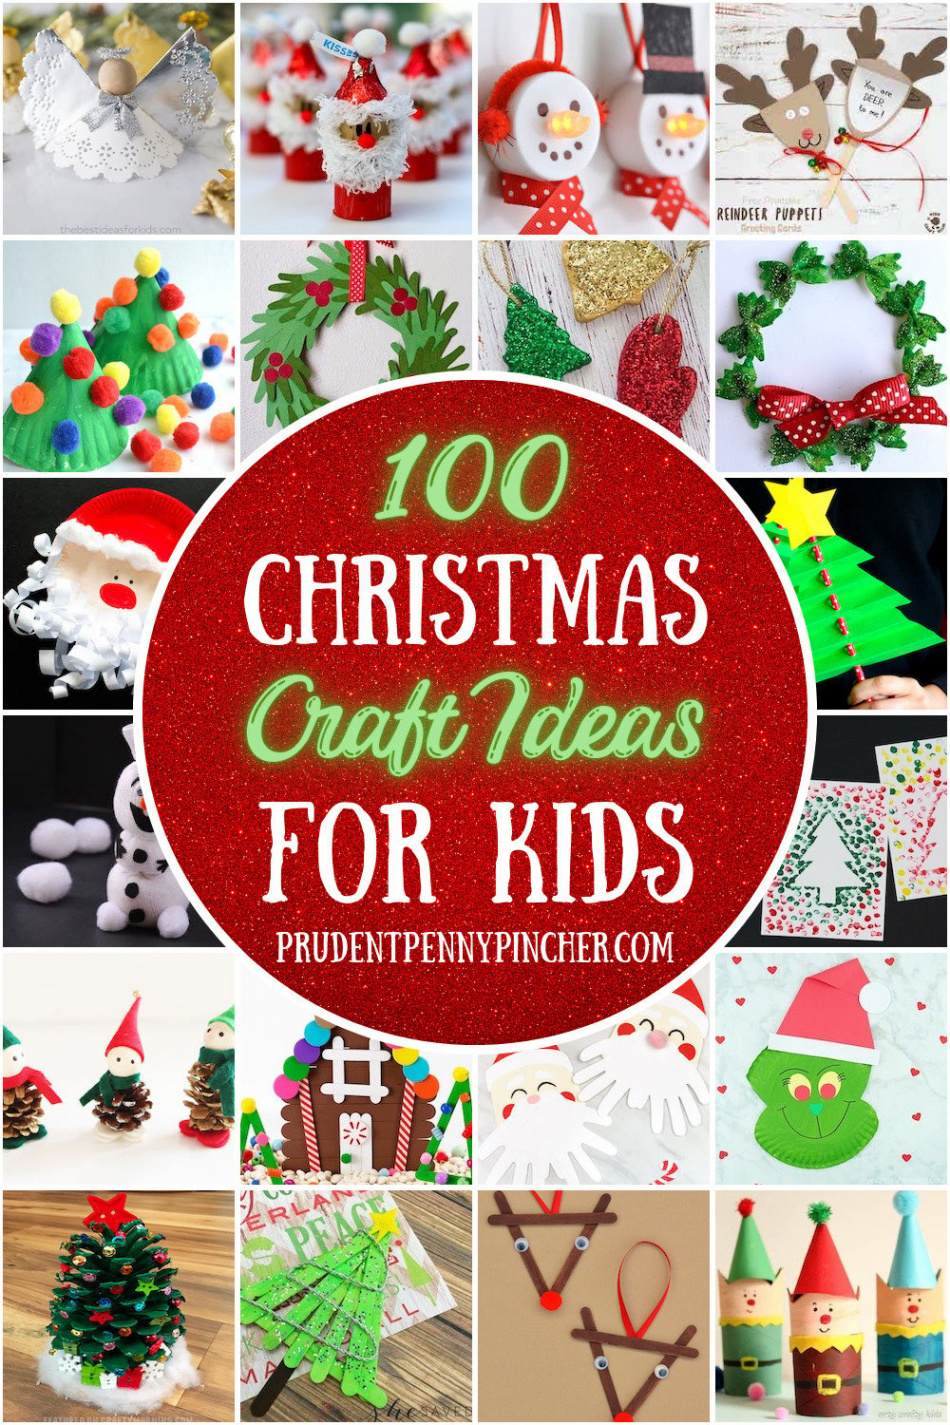 Easy Christmas Crafts for Kids - Prudent Penny Pincher